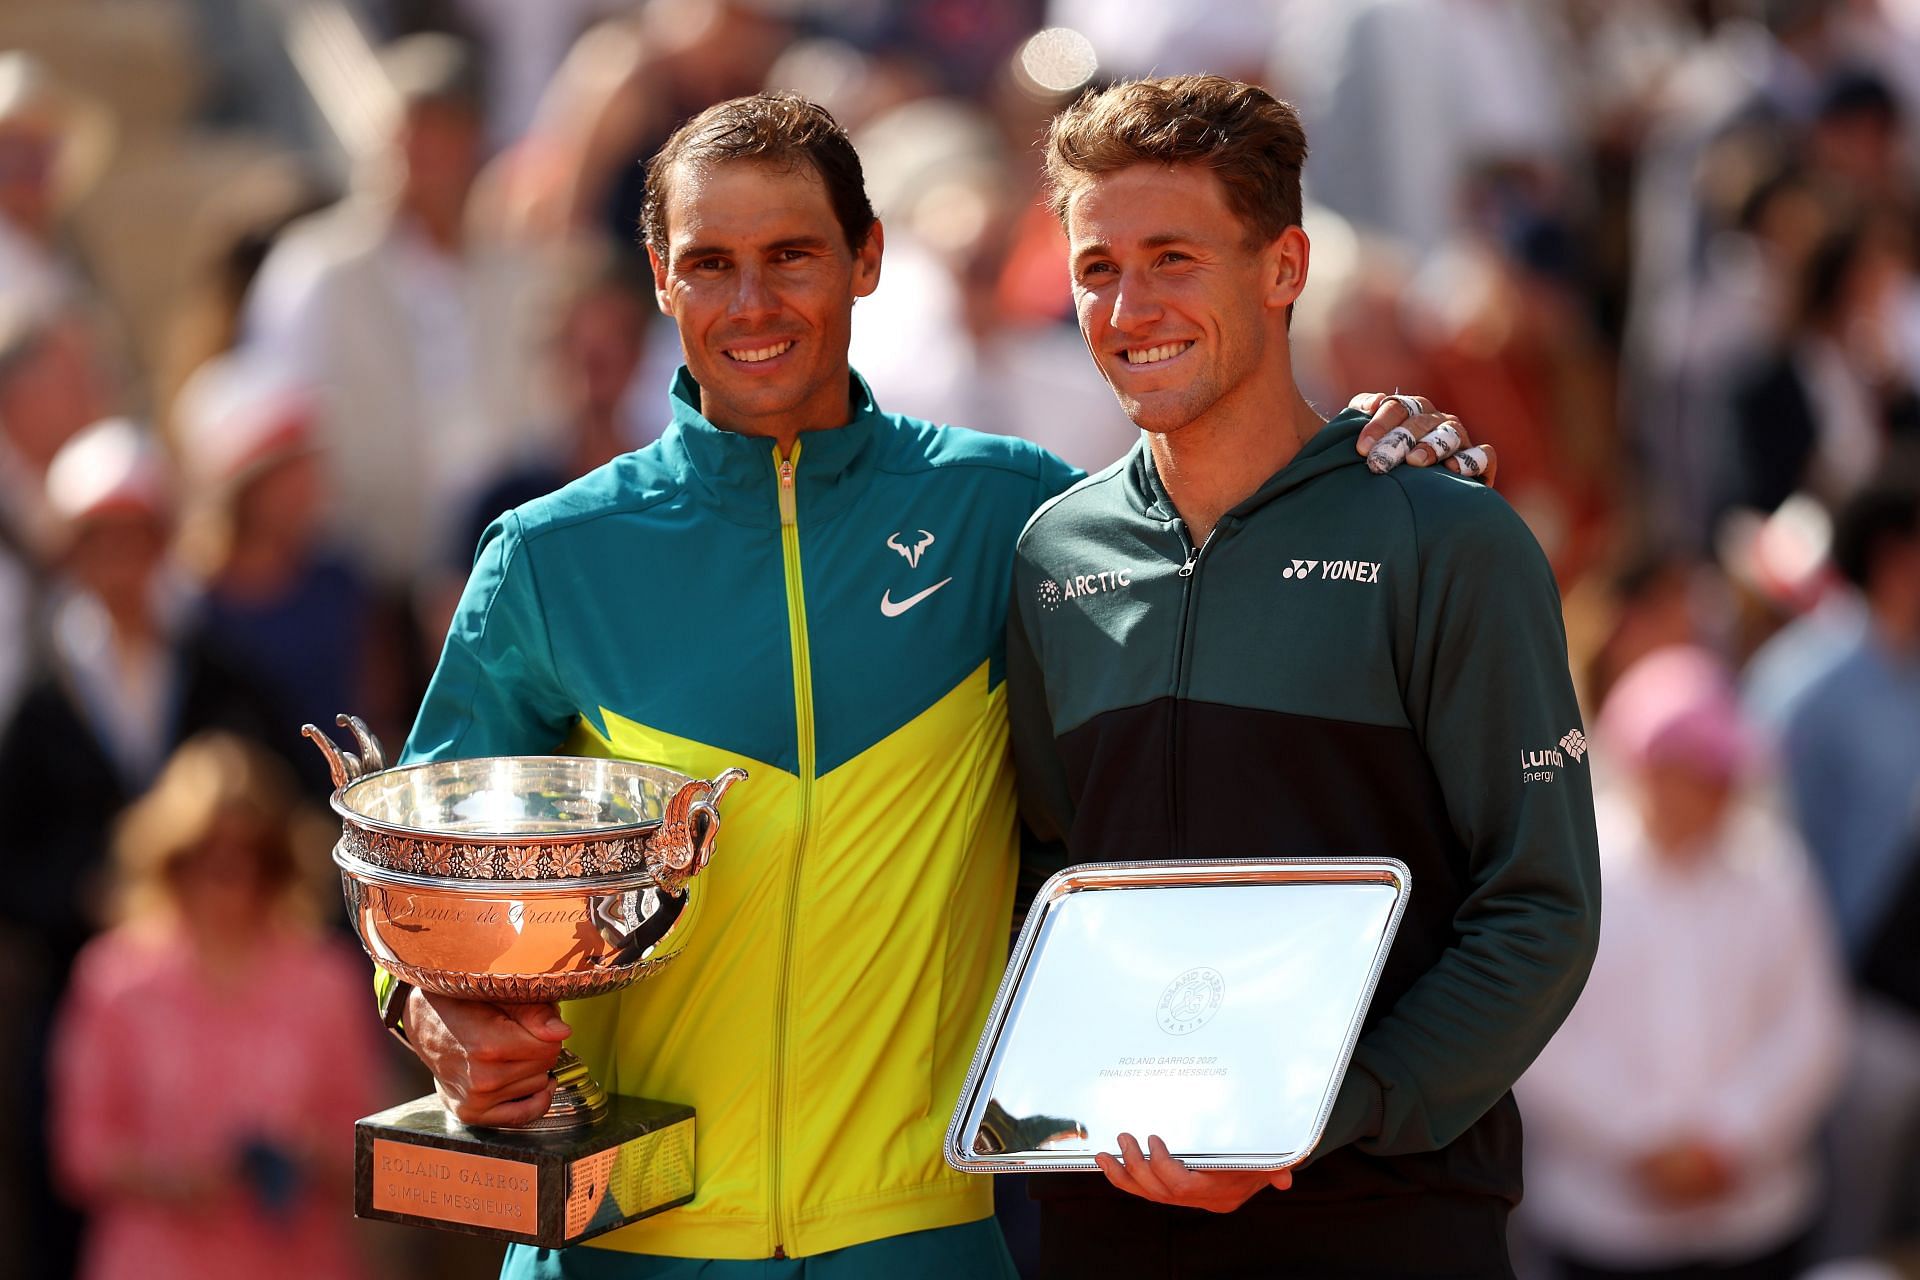 Rafael Nadal (L) and Casper Ruud (R) at the 2022 French Open